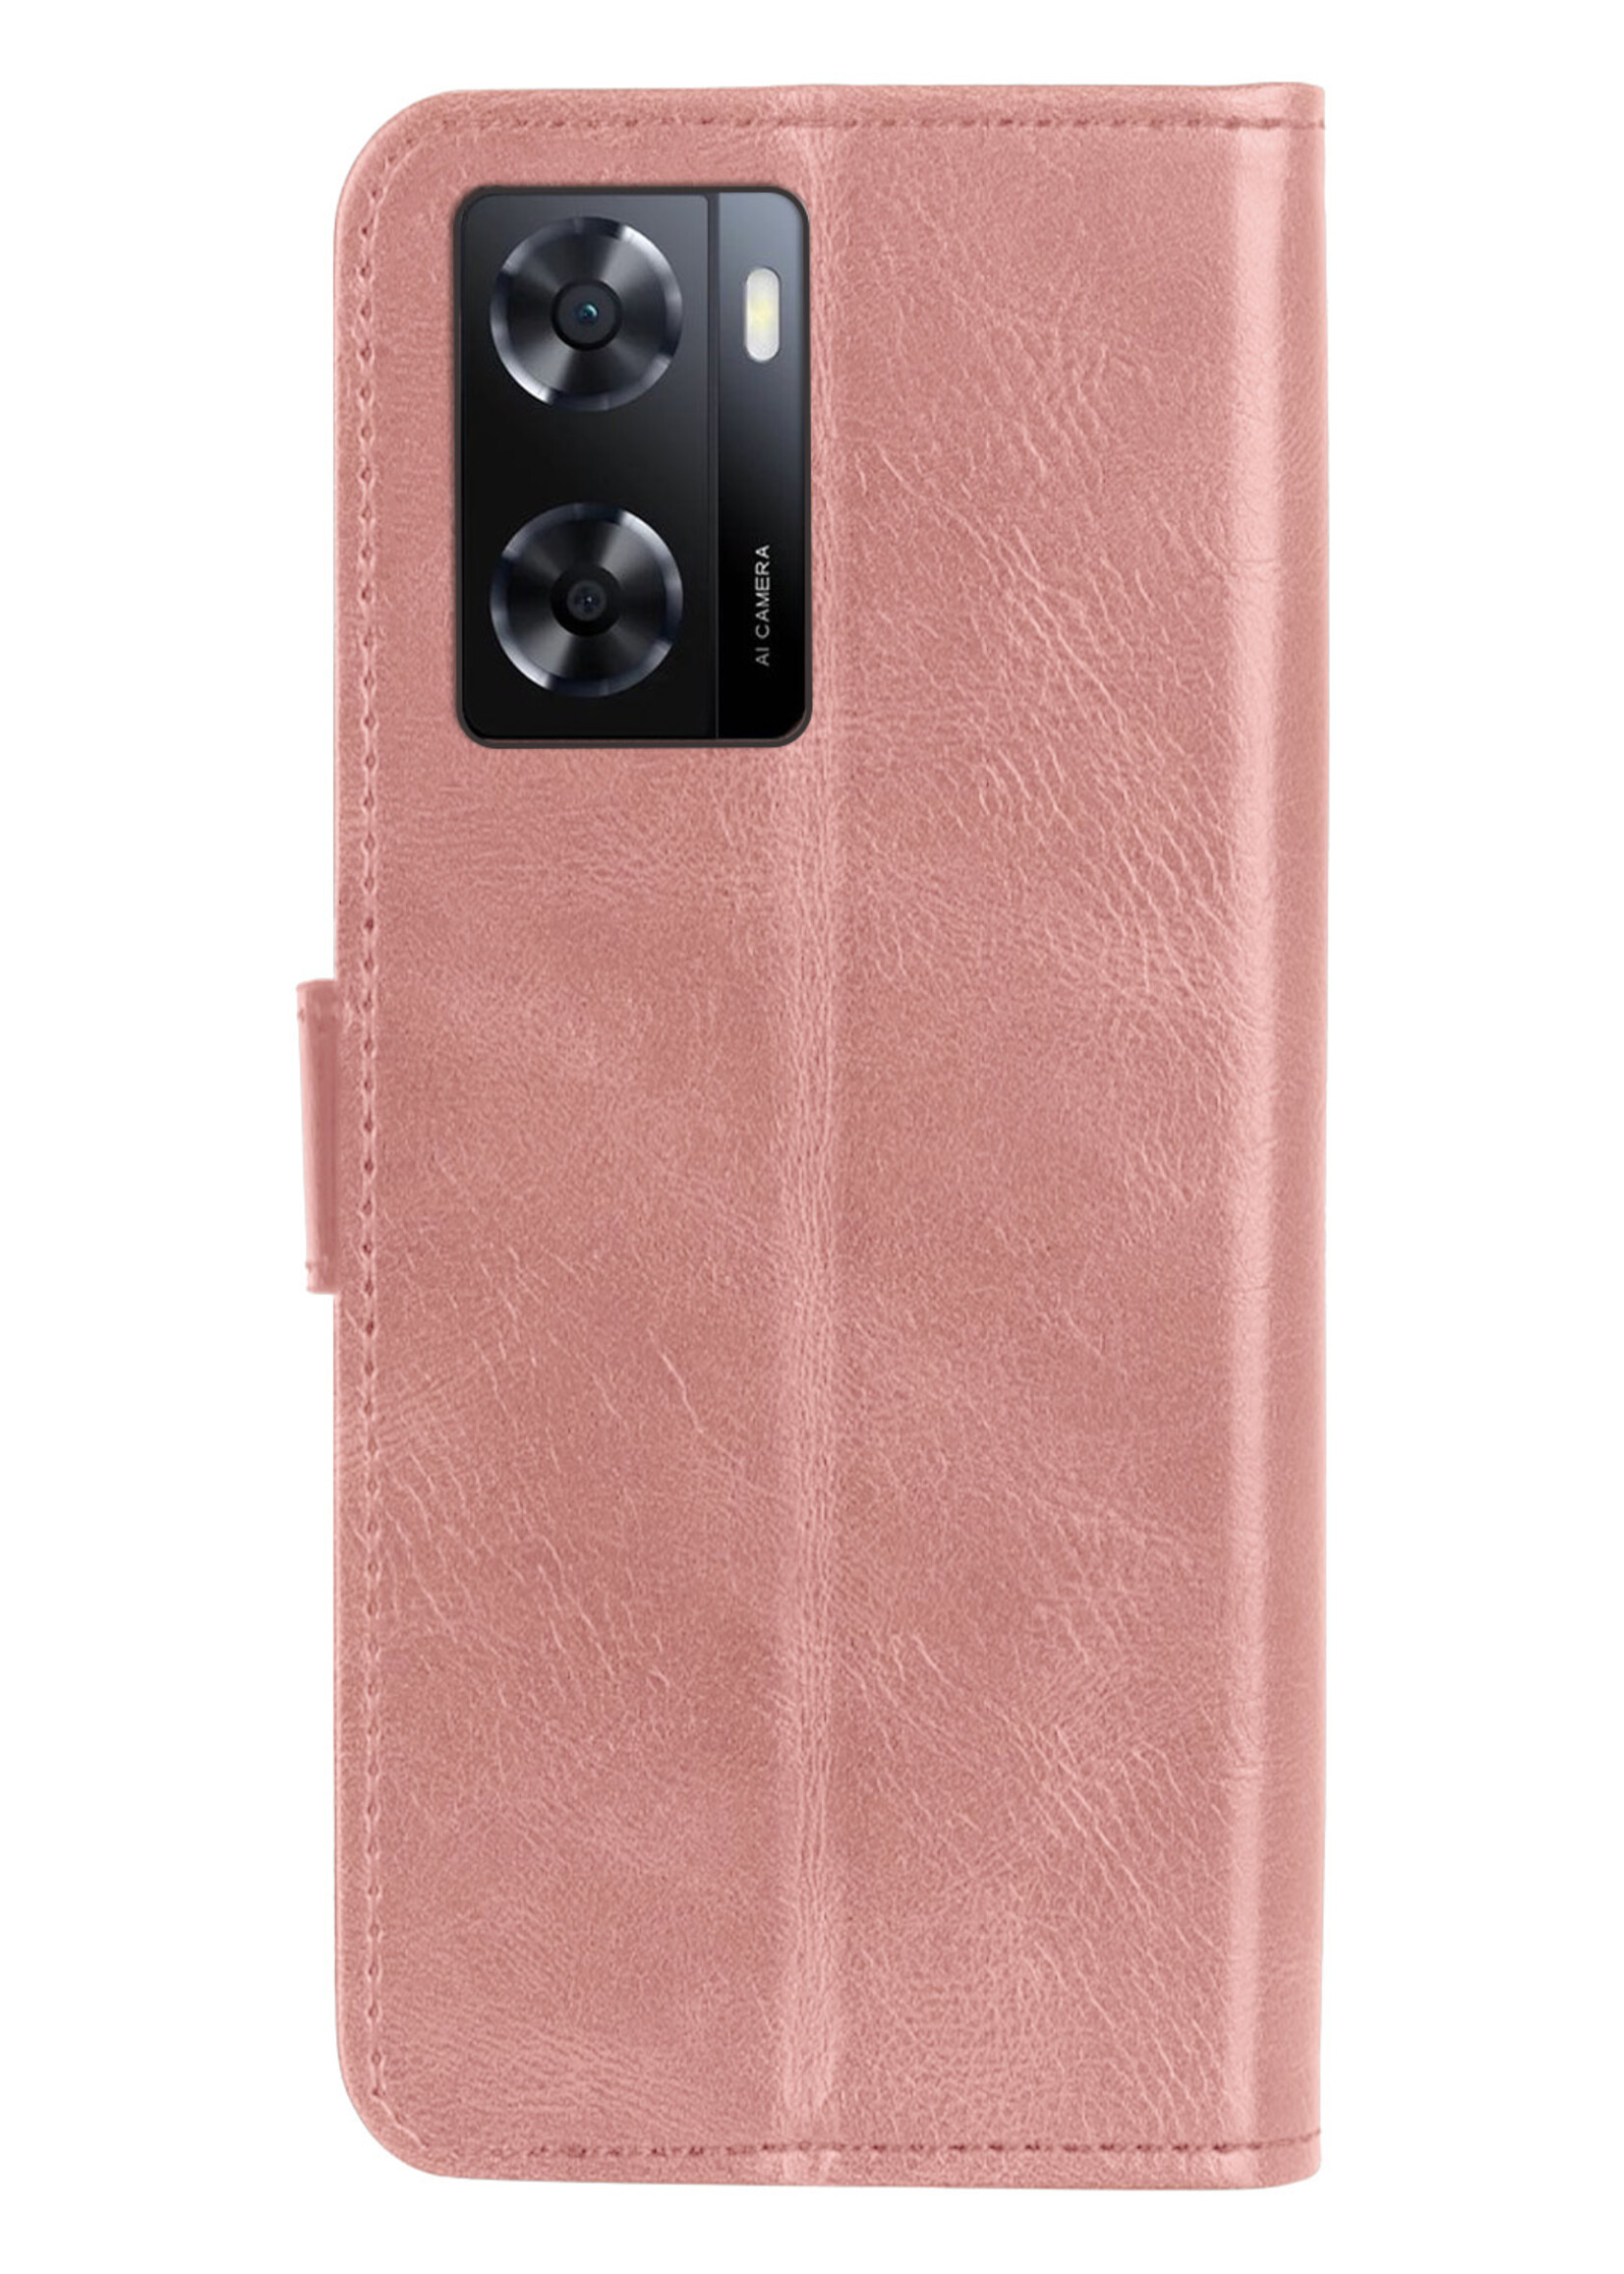 BTH OPPO A57 Hoesje Book Case Hoes Portemonnee Cover Walletcase - OPPO A57 Hoes Bookcase Hoesje - Rose Goud